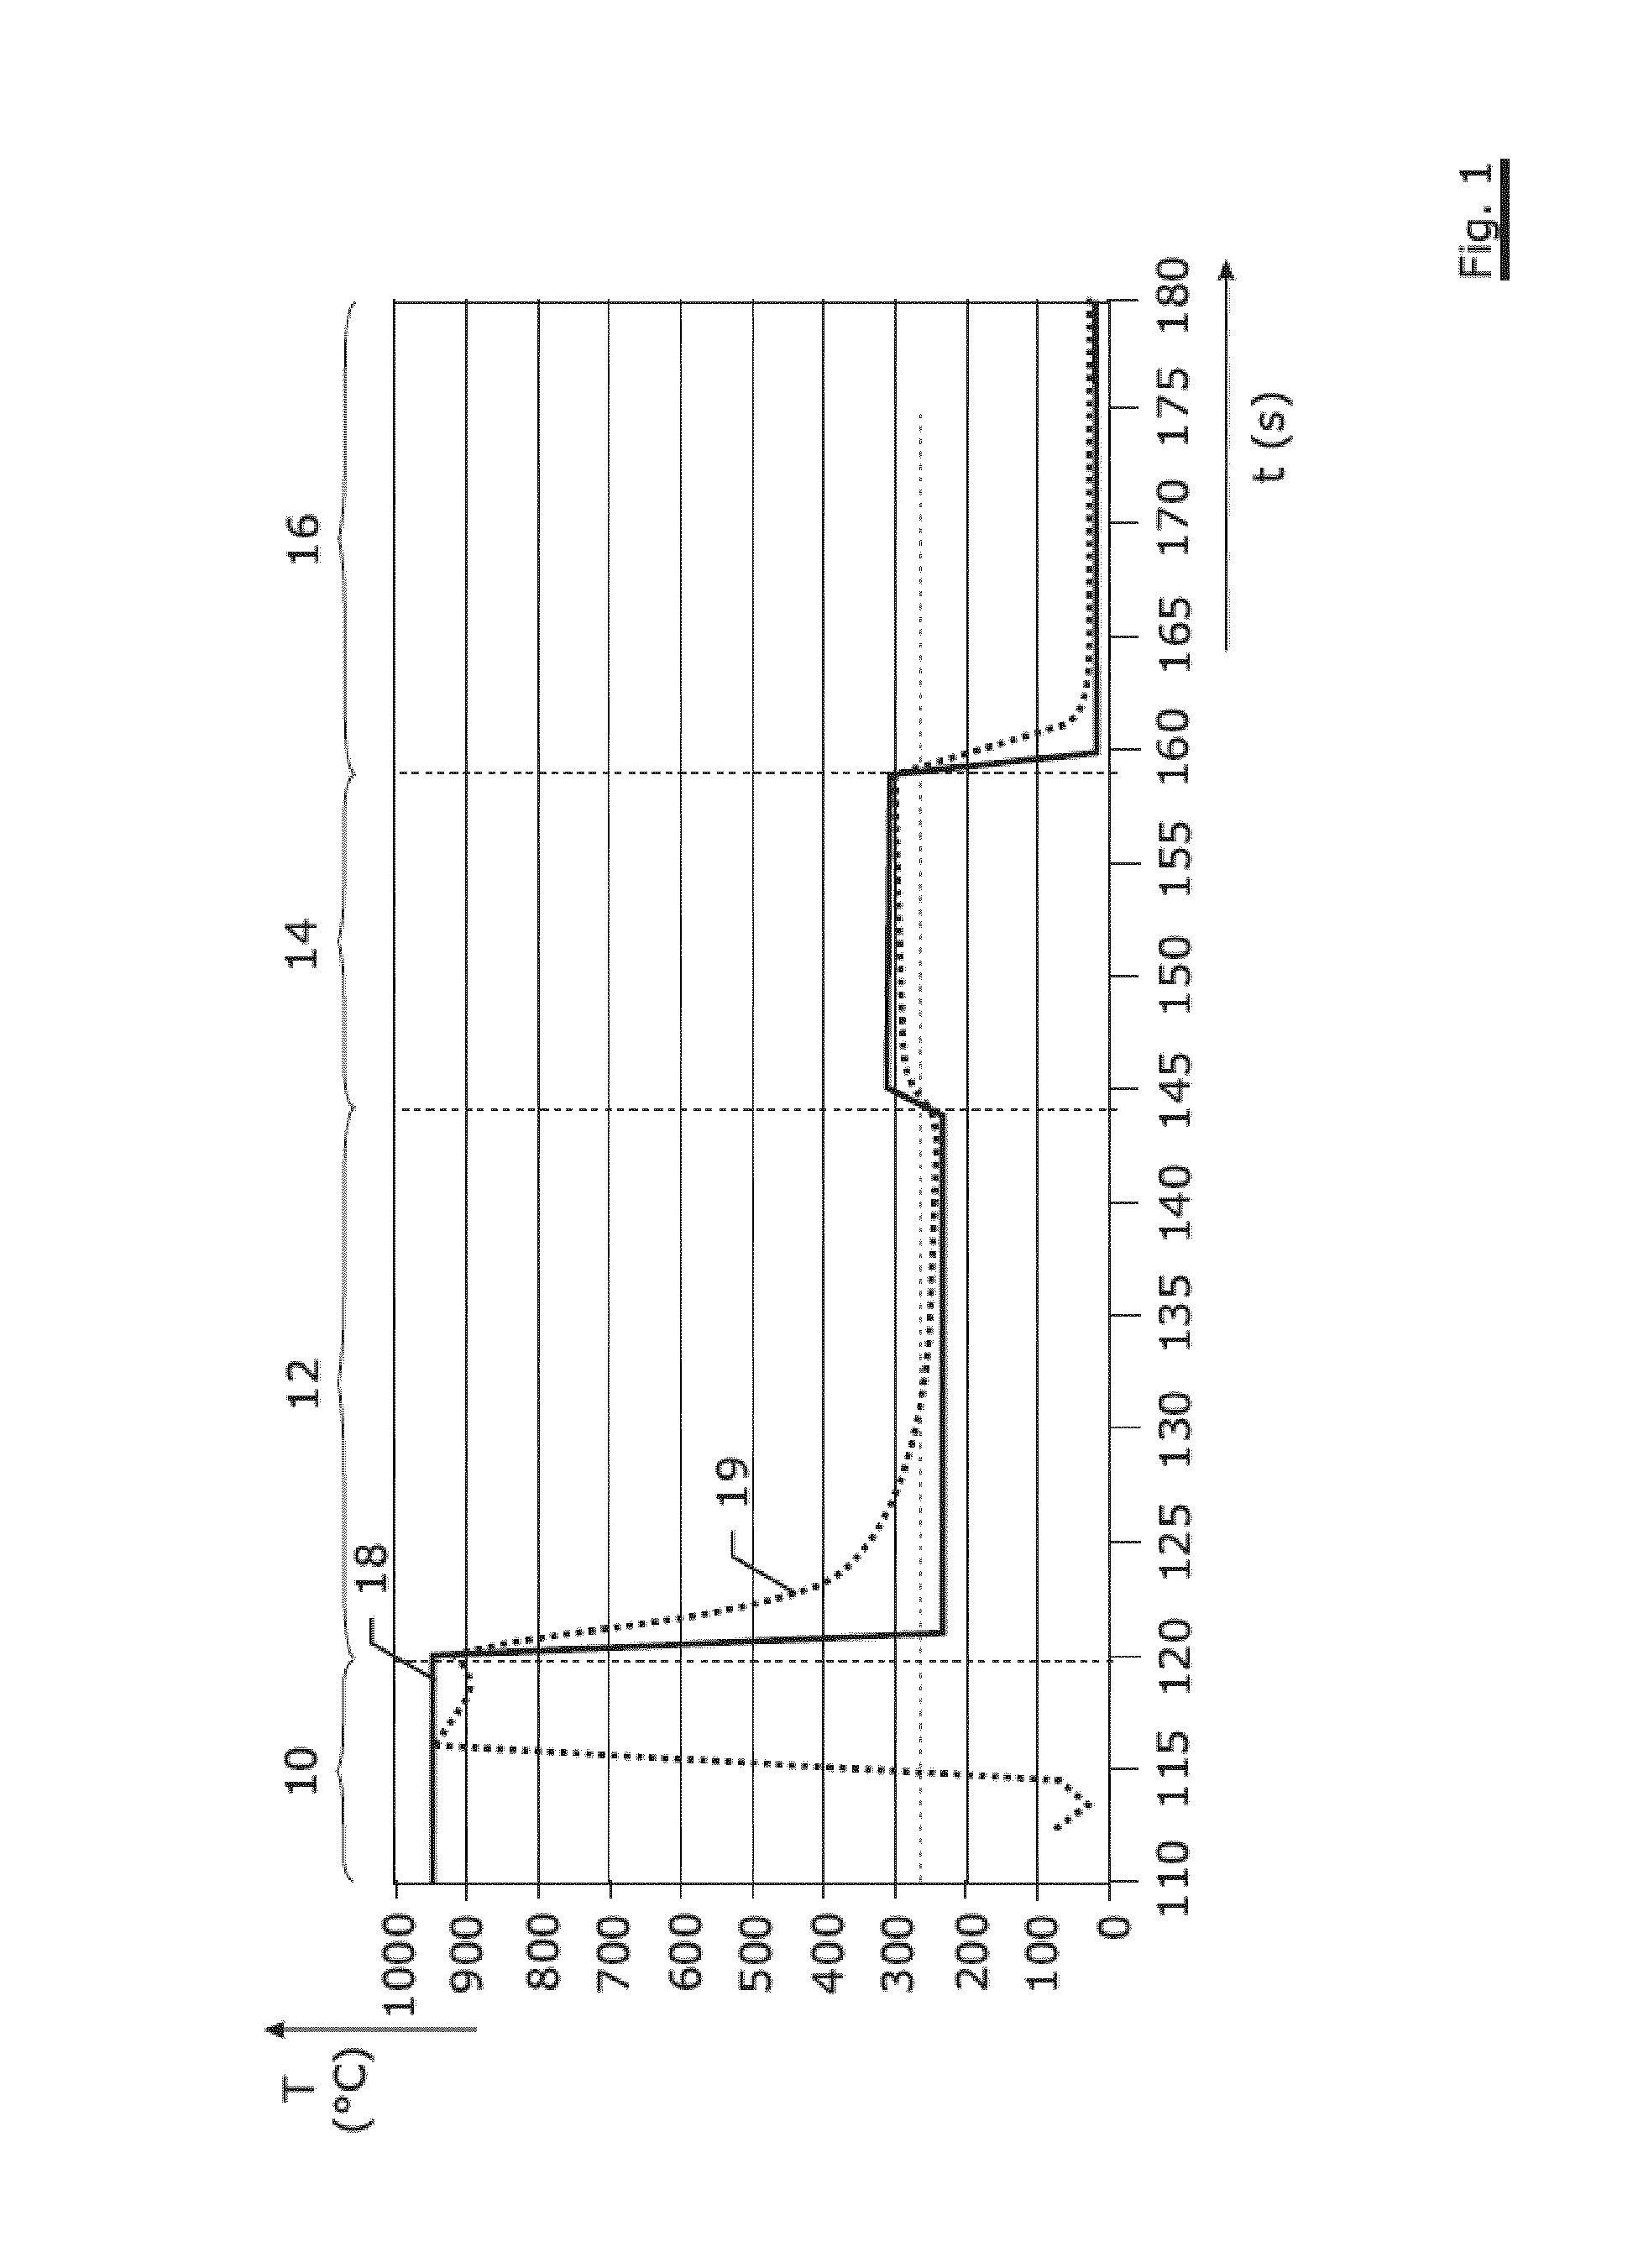 Quenched and partitioned high-carbon steel wire